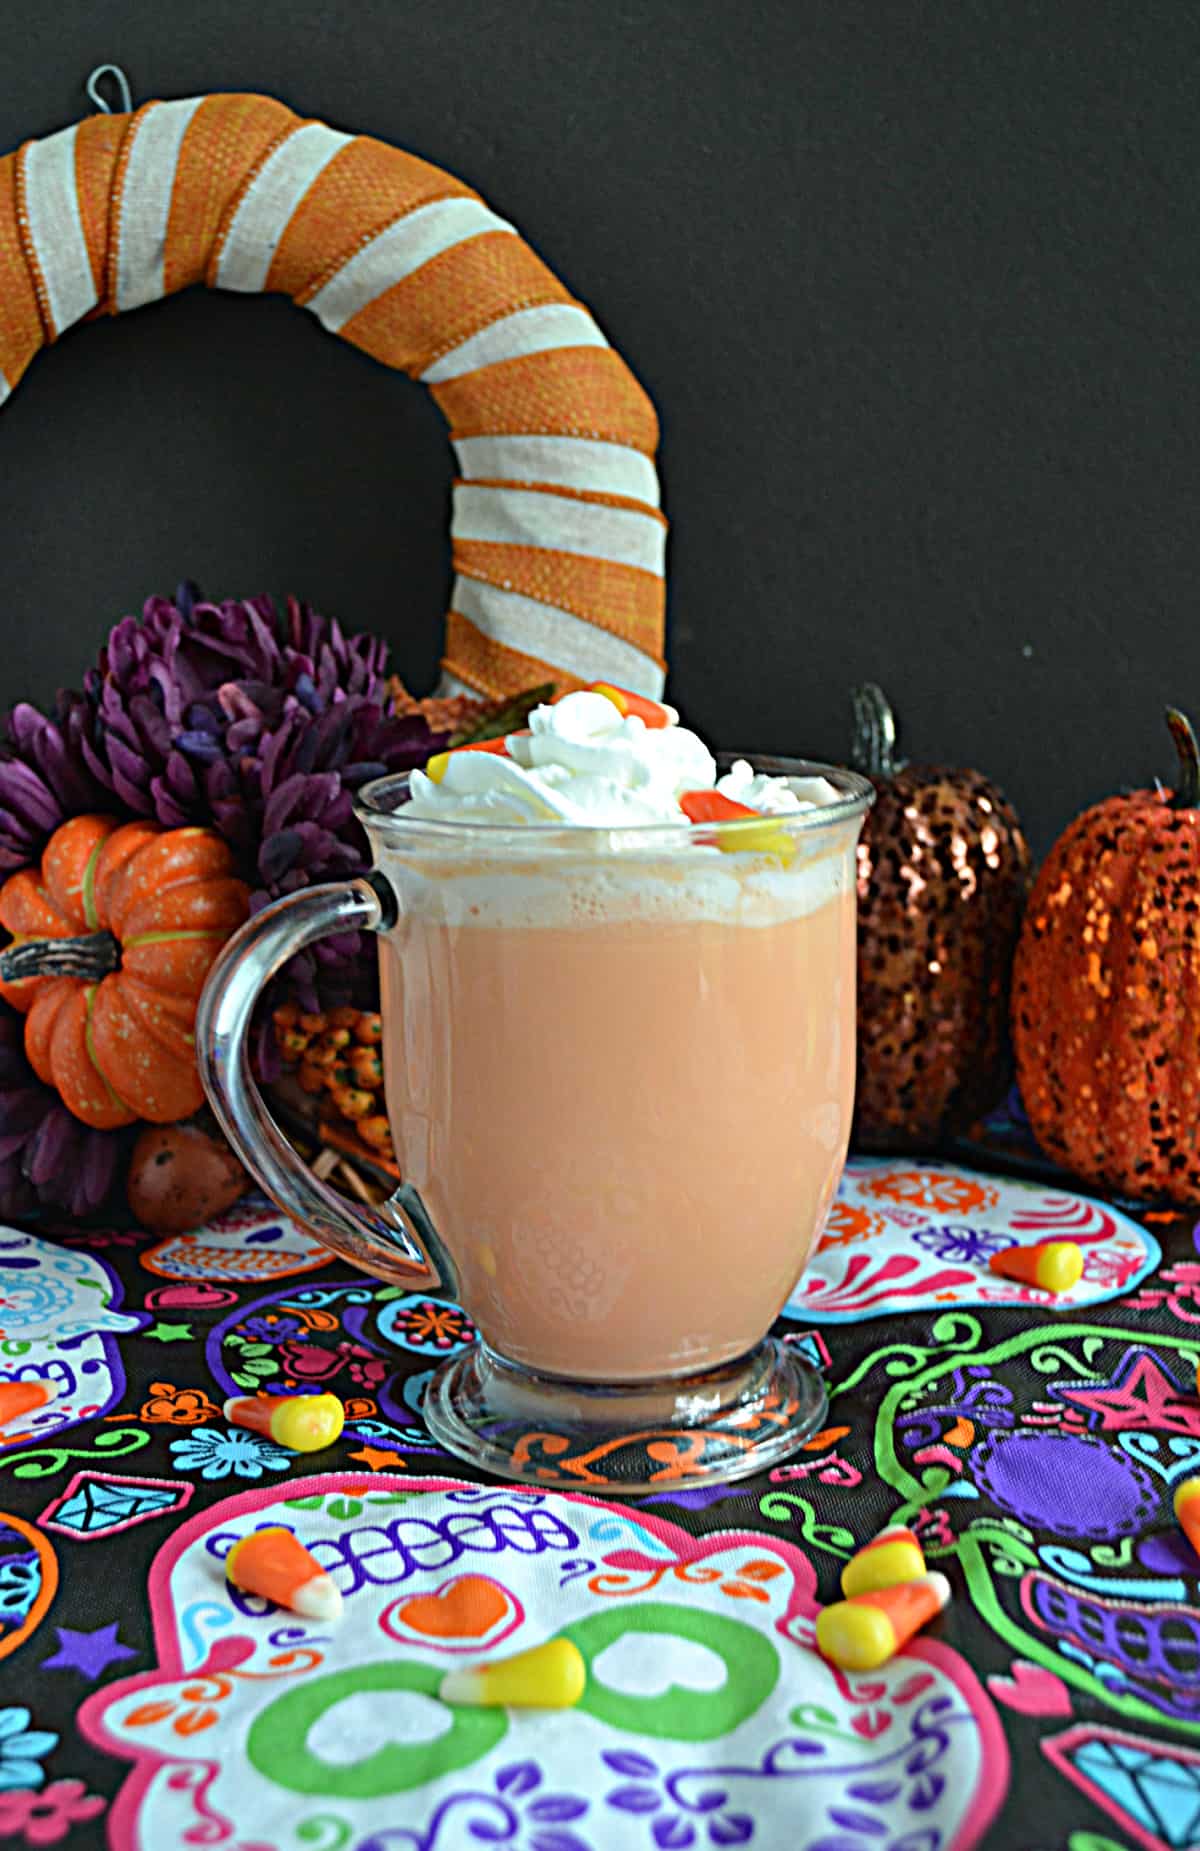 A close up view of a mug of orange candy corn hot chocolate topped with whipped cream and candy corn.